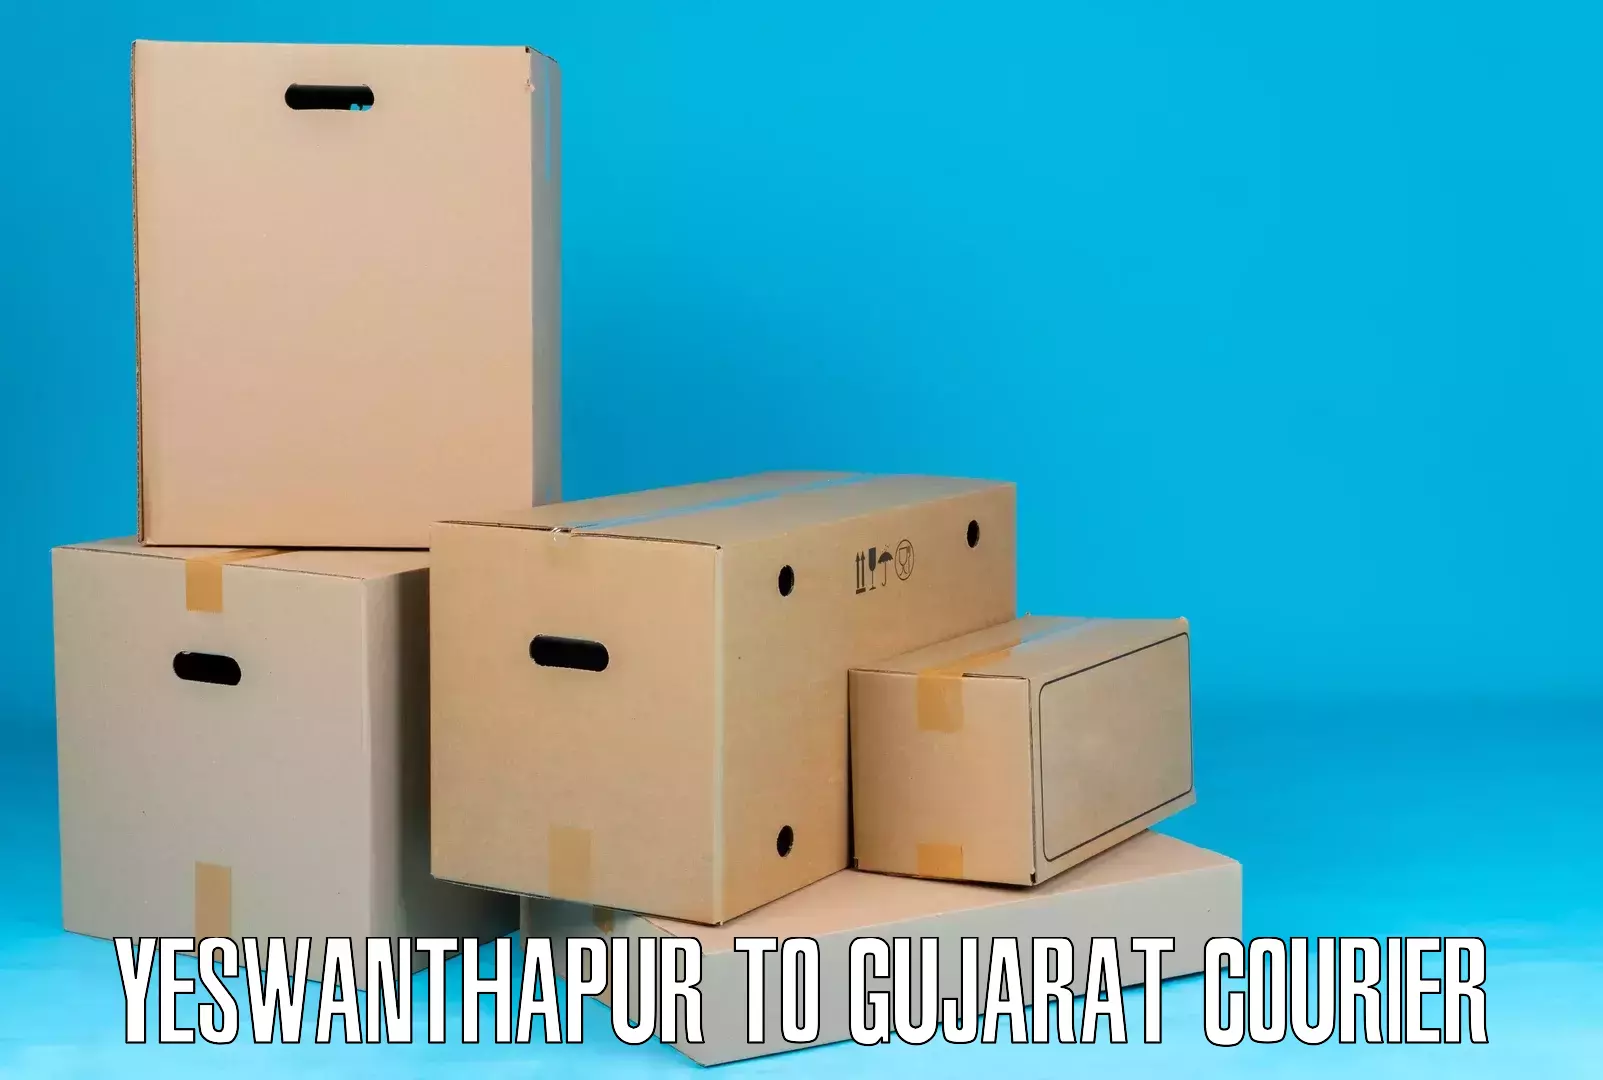 24/7 courier service Yeswanthapur to Naliya